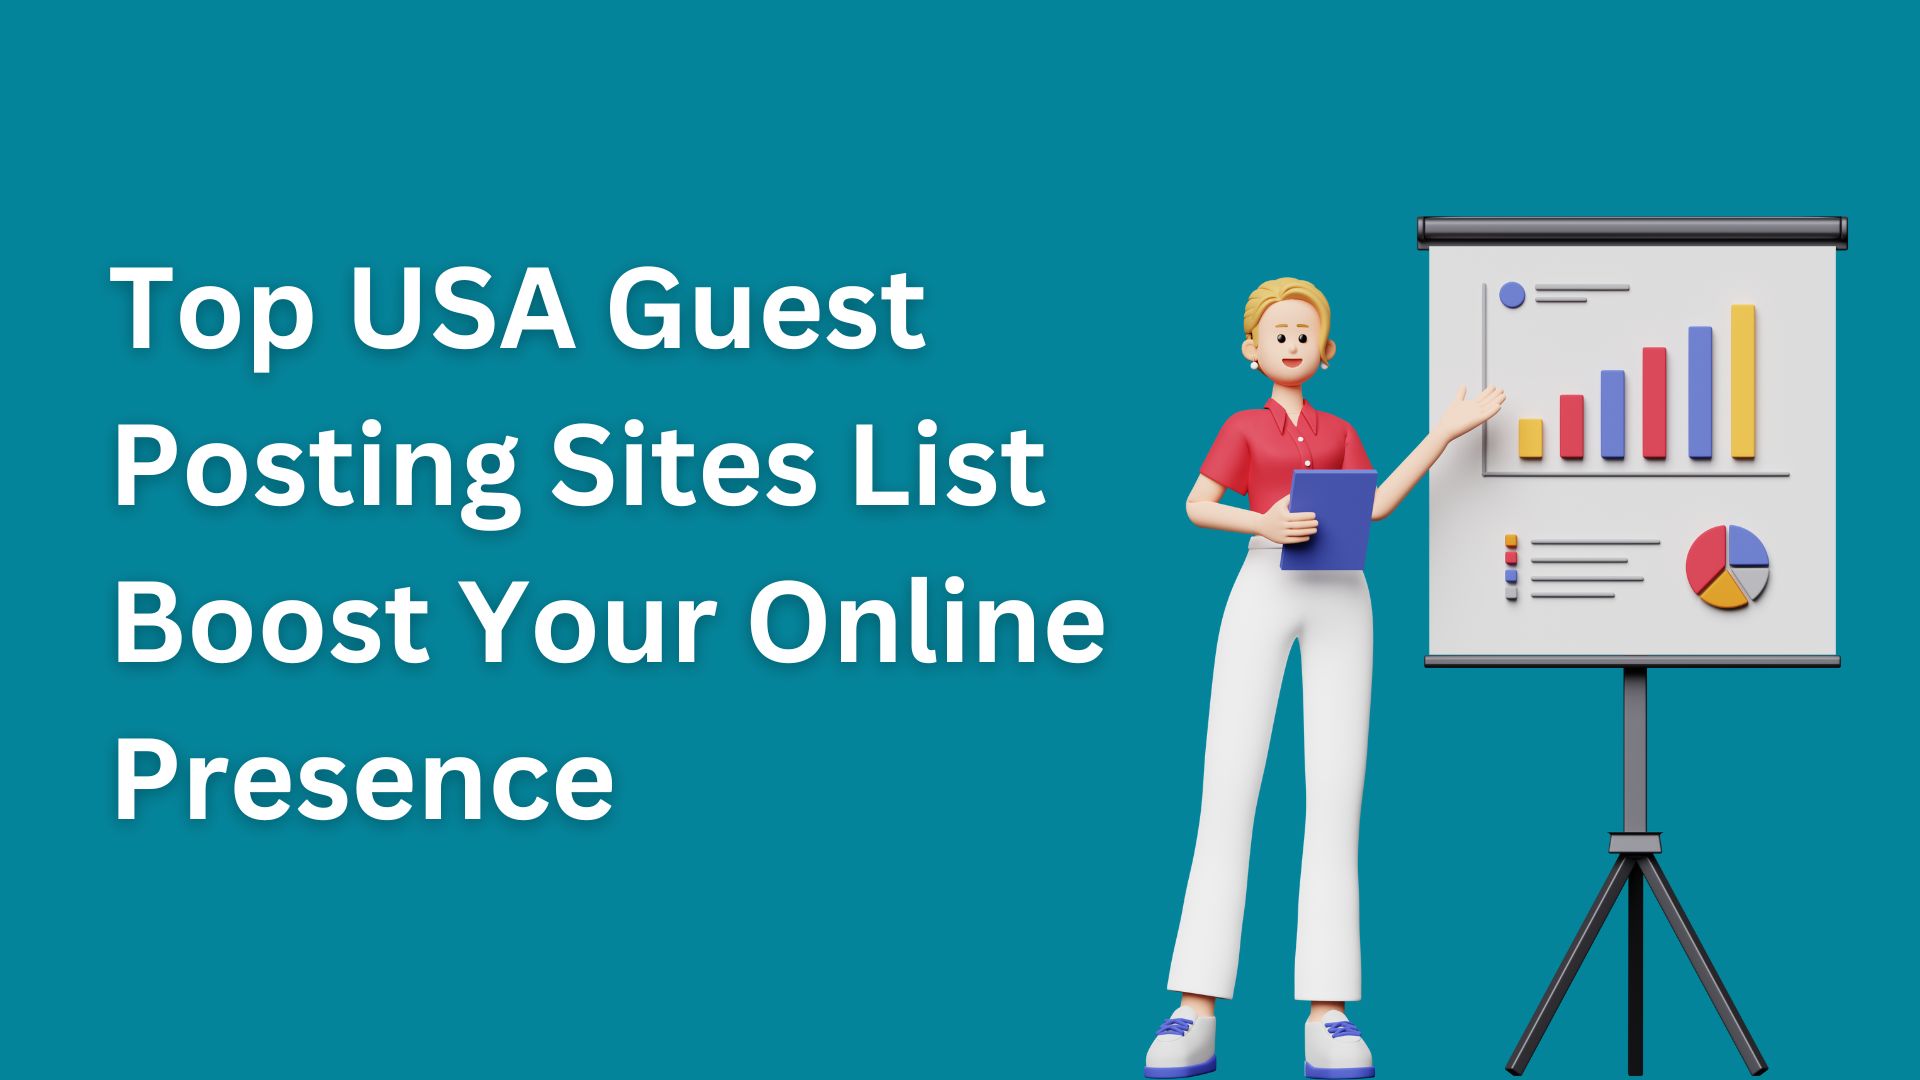 Top USA Guest Posting Sites List - Boost Your Online Presence